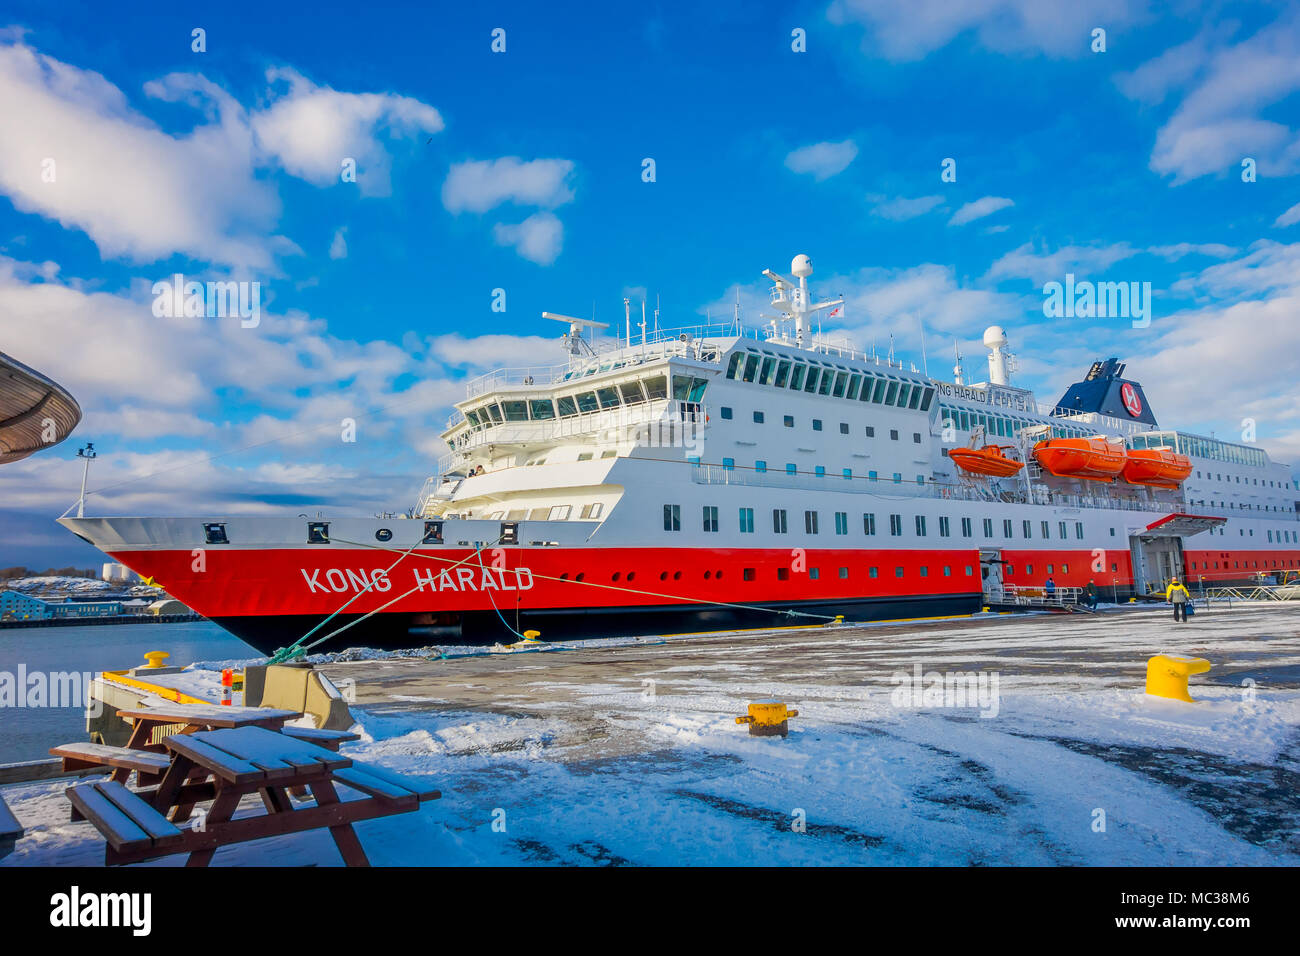 Bodo, Norway - April 09, 2018: Outdoor view of Hurtigruten coastal vessel KONG HARALD, is a daily passenger and freight shipping service parked in the coast of Bodo Stock Photo